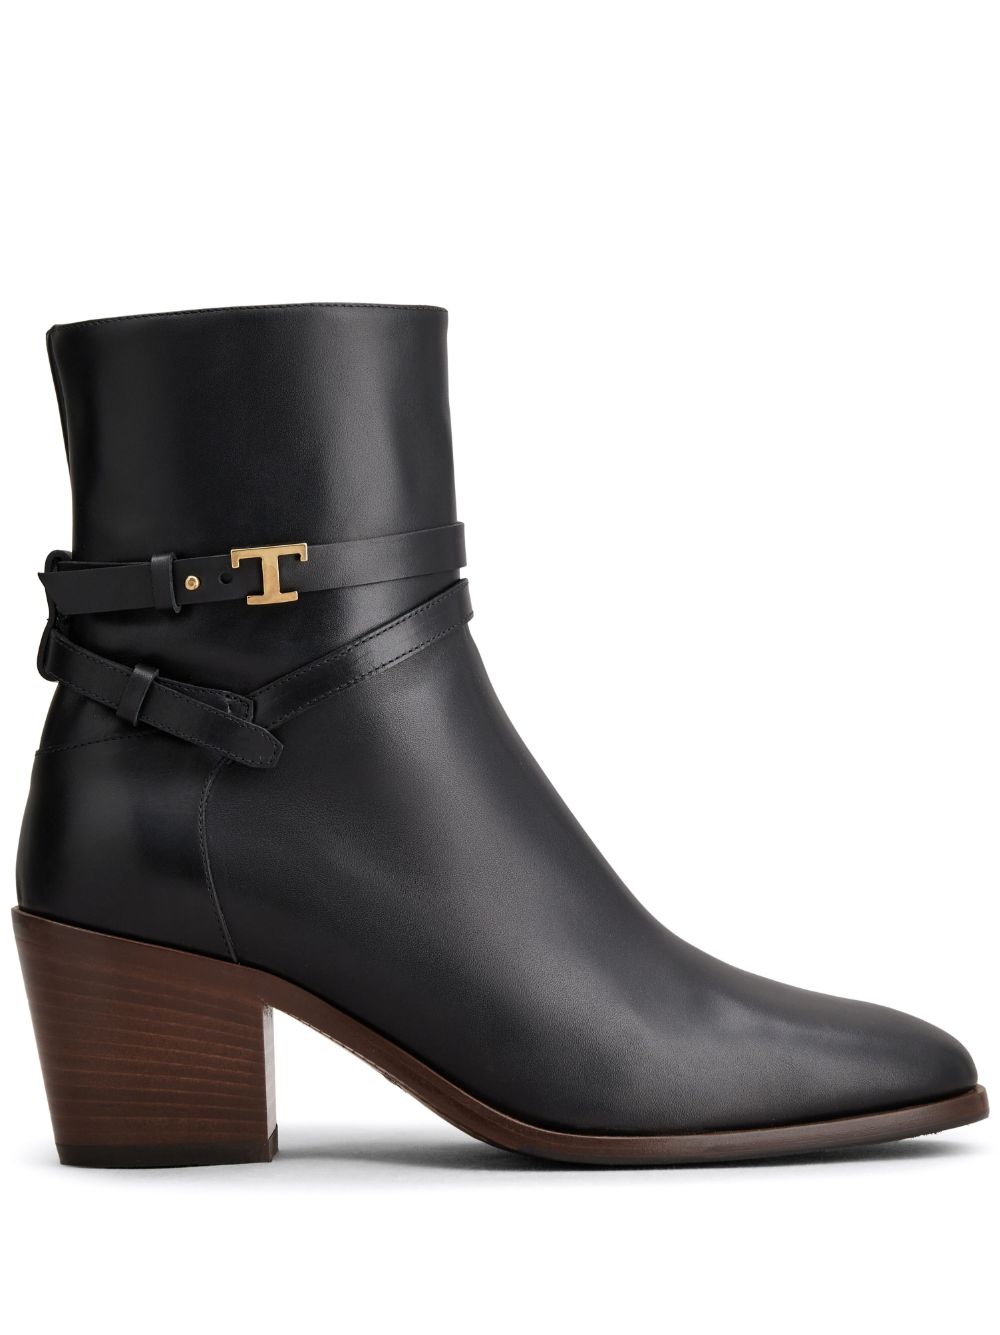 TOD'S Classic Logo Leather Boots for Women